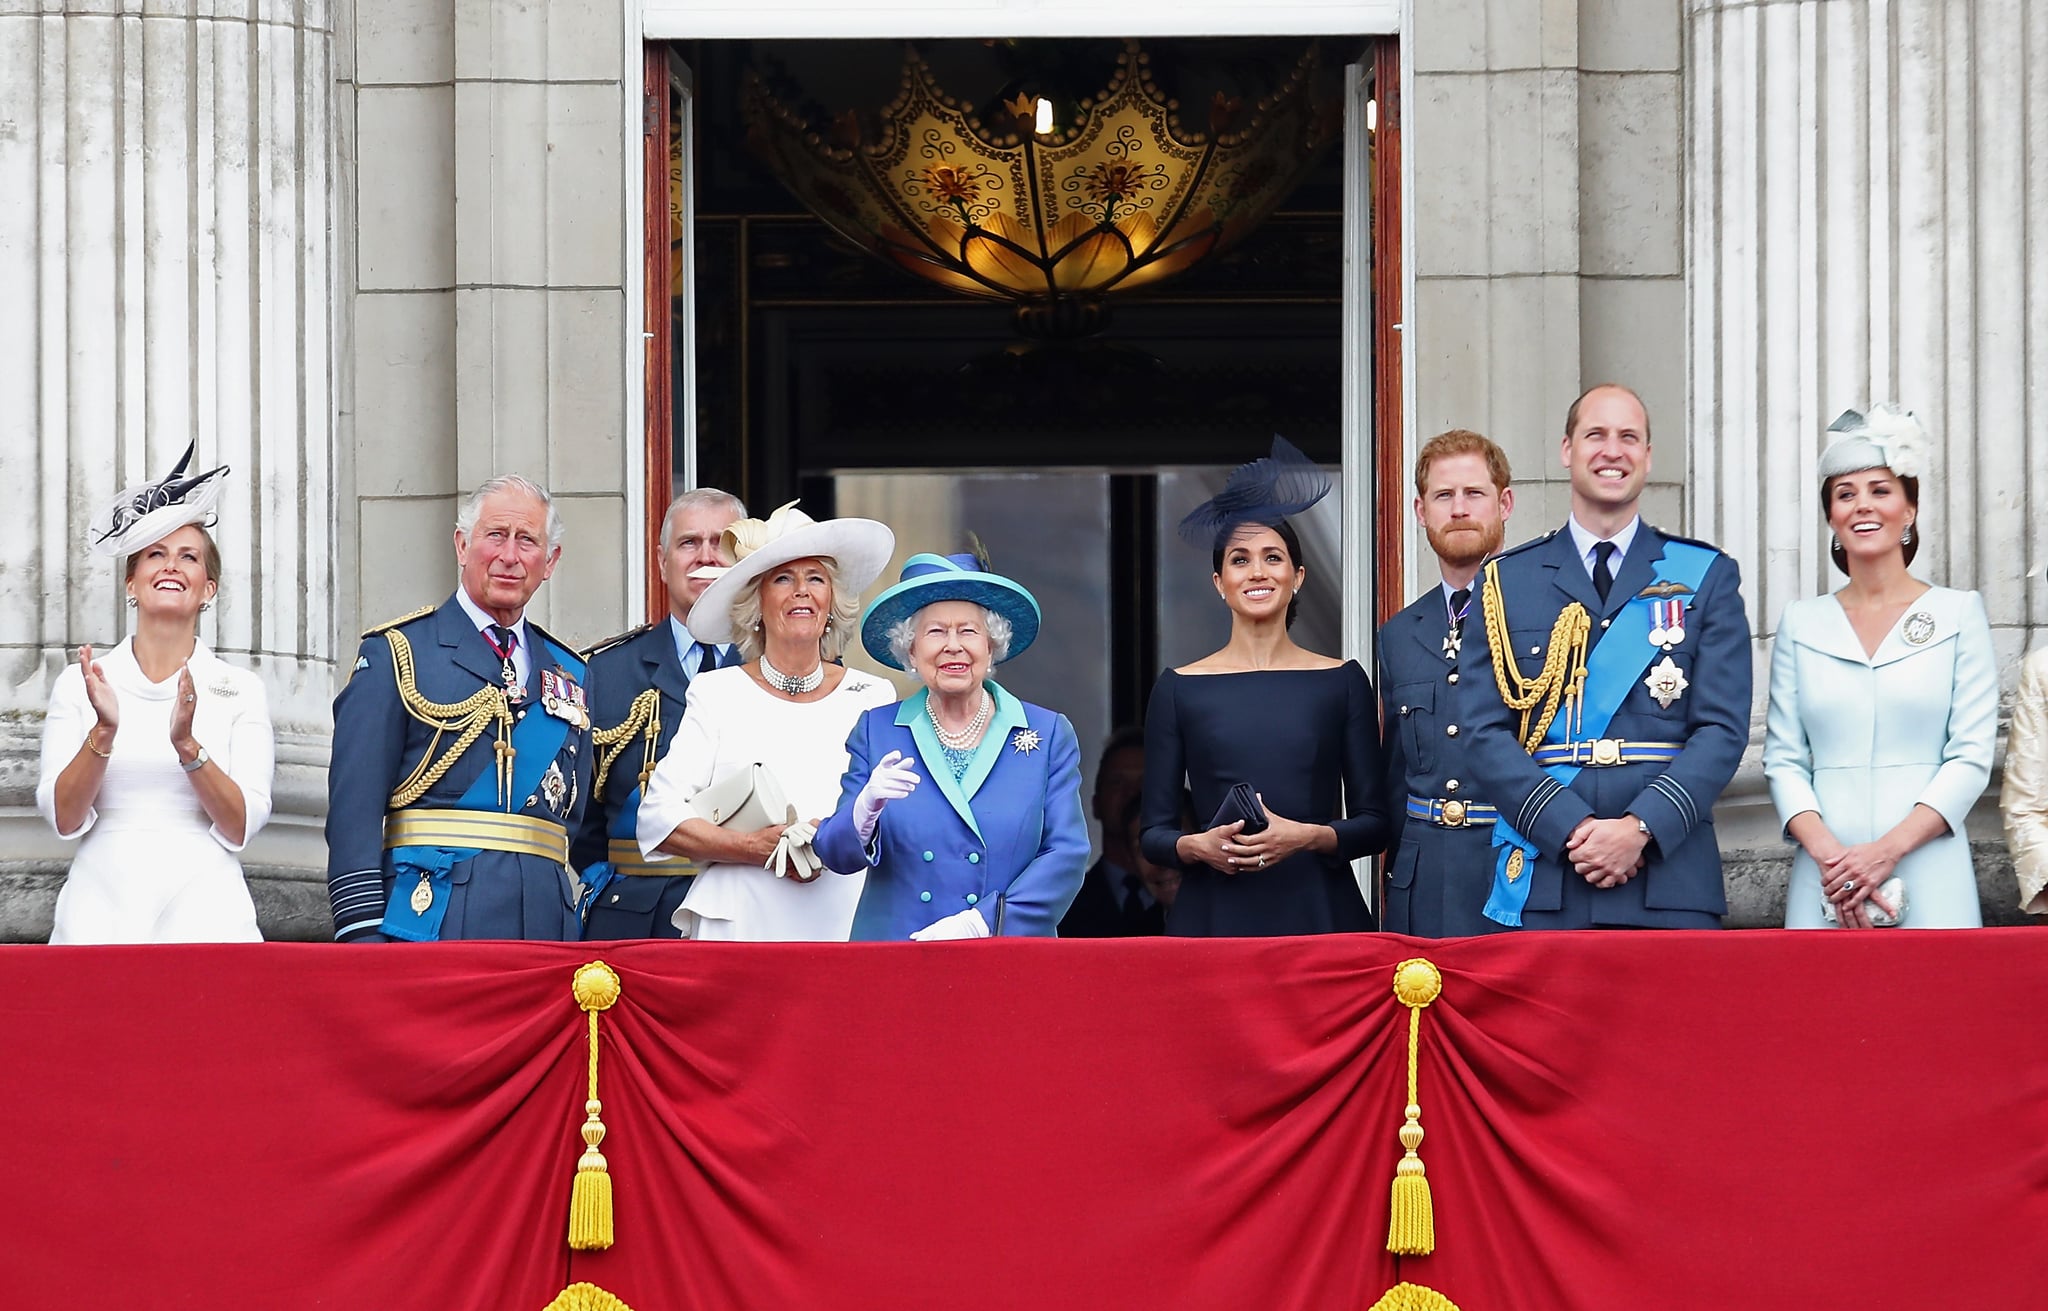 LONDON, ENGLAND - JULY 10:  (L-R) Prince Charles, Prince of Wales, Prince Andrew, Duke of York, Camilla, Duchess of Cornwall, Queen Elizabeth II, Meghan, Duchess of Sussex, Prince Harry, Duke of Sussex, Prince William, Duke of Cambridge and Catherine, Duchess of Cambridge watch the RAF flypast on the balcony of Buckingham Palace, as members of the Royal Family attend events to mark the centenary of the RAF on July 10, 2018 in London, England.  (Photo by Chris Jackson/Getty Images)